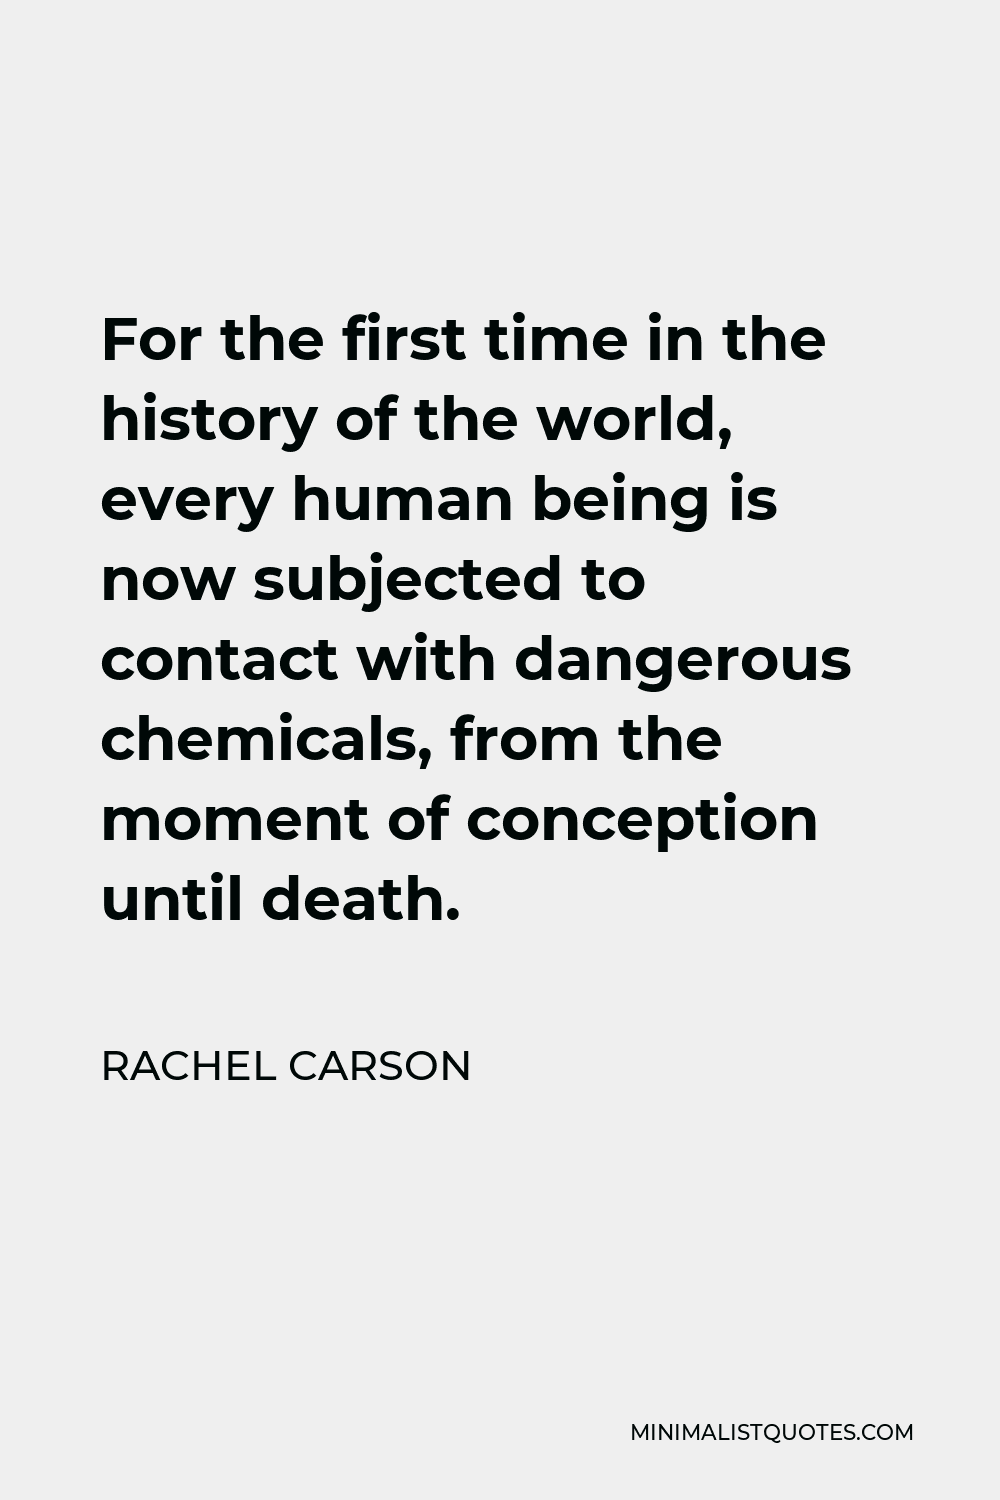 Rachel Carson Quote - For the first time in the history of the world, every human being is now subjected to contact with dangerous chemicals, from the moment of conception until death.